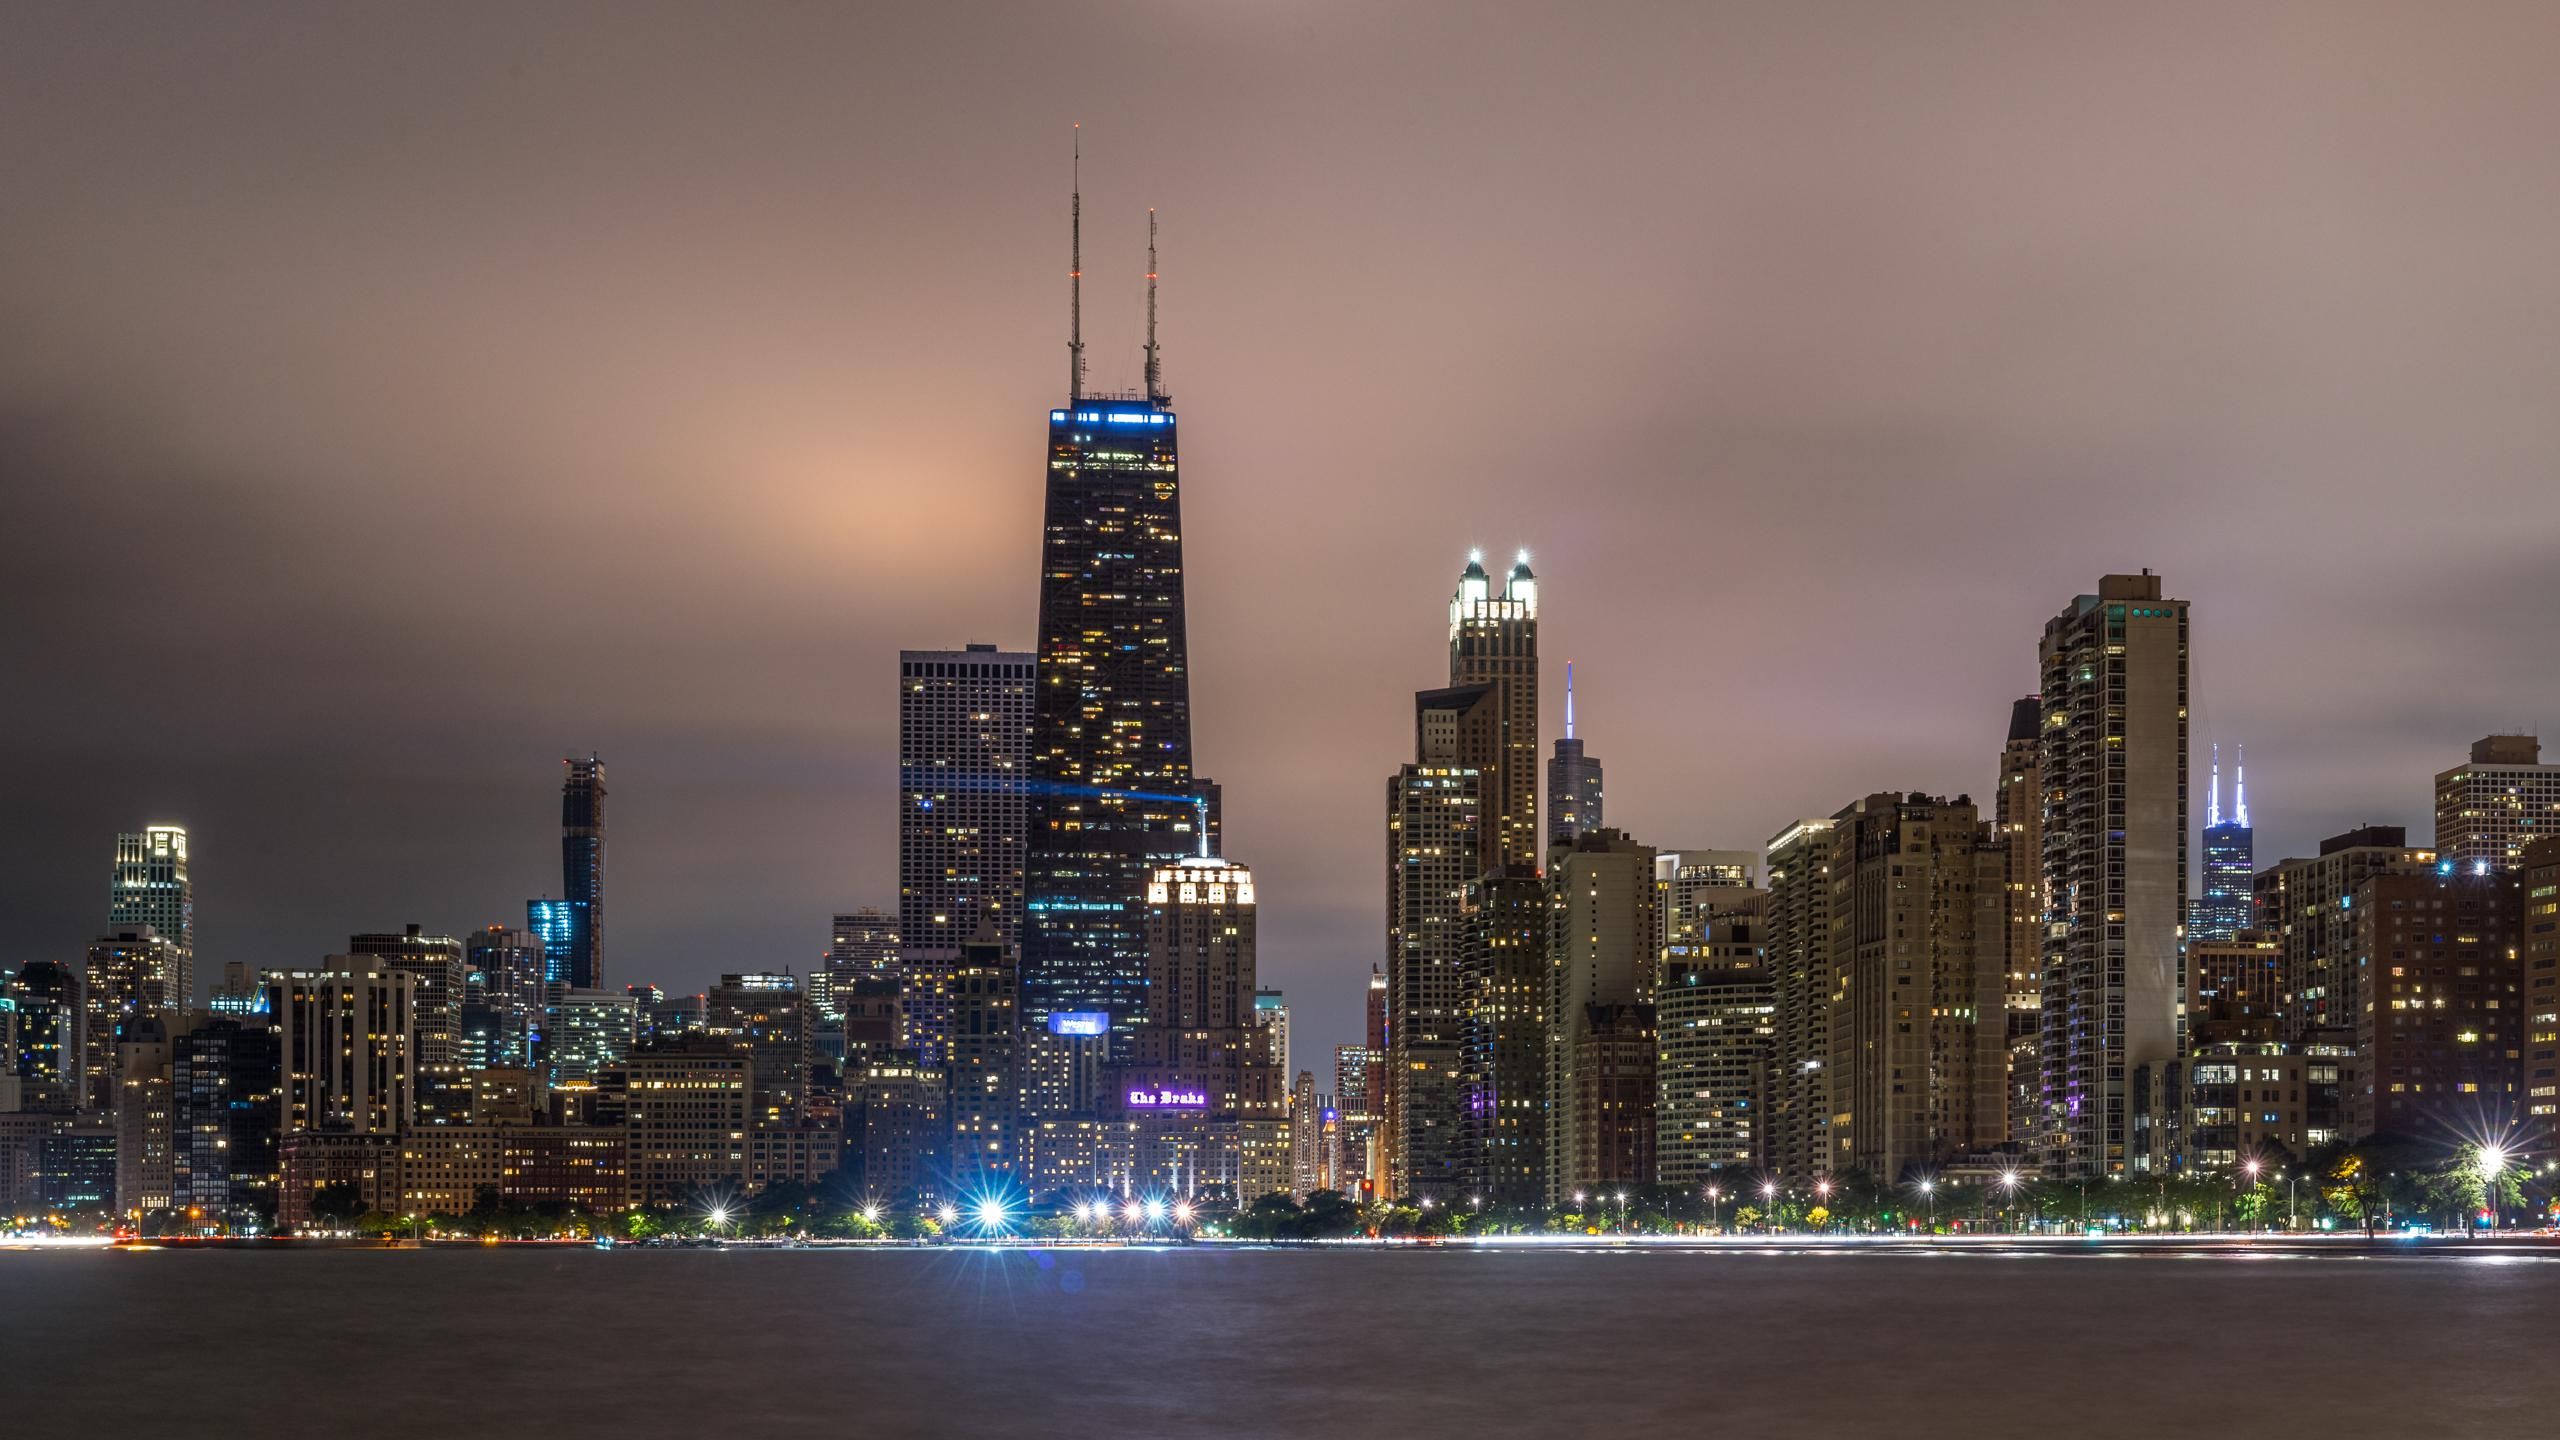 Chicago Skyline for Dual Monitors wallpaper in 2560x1440 resolution